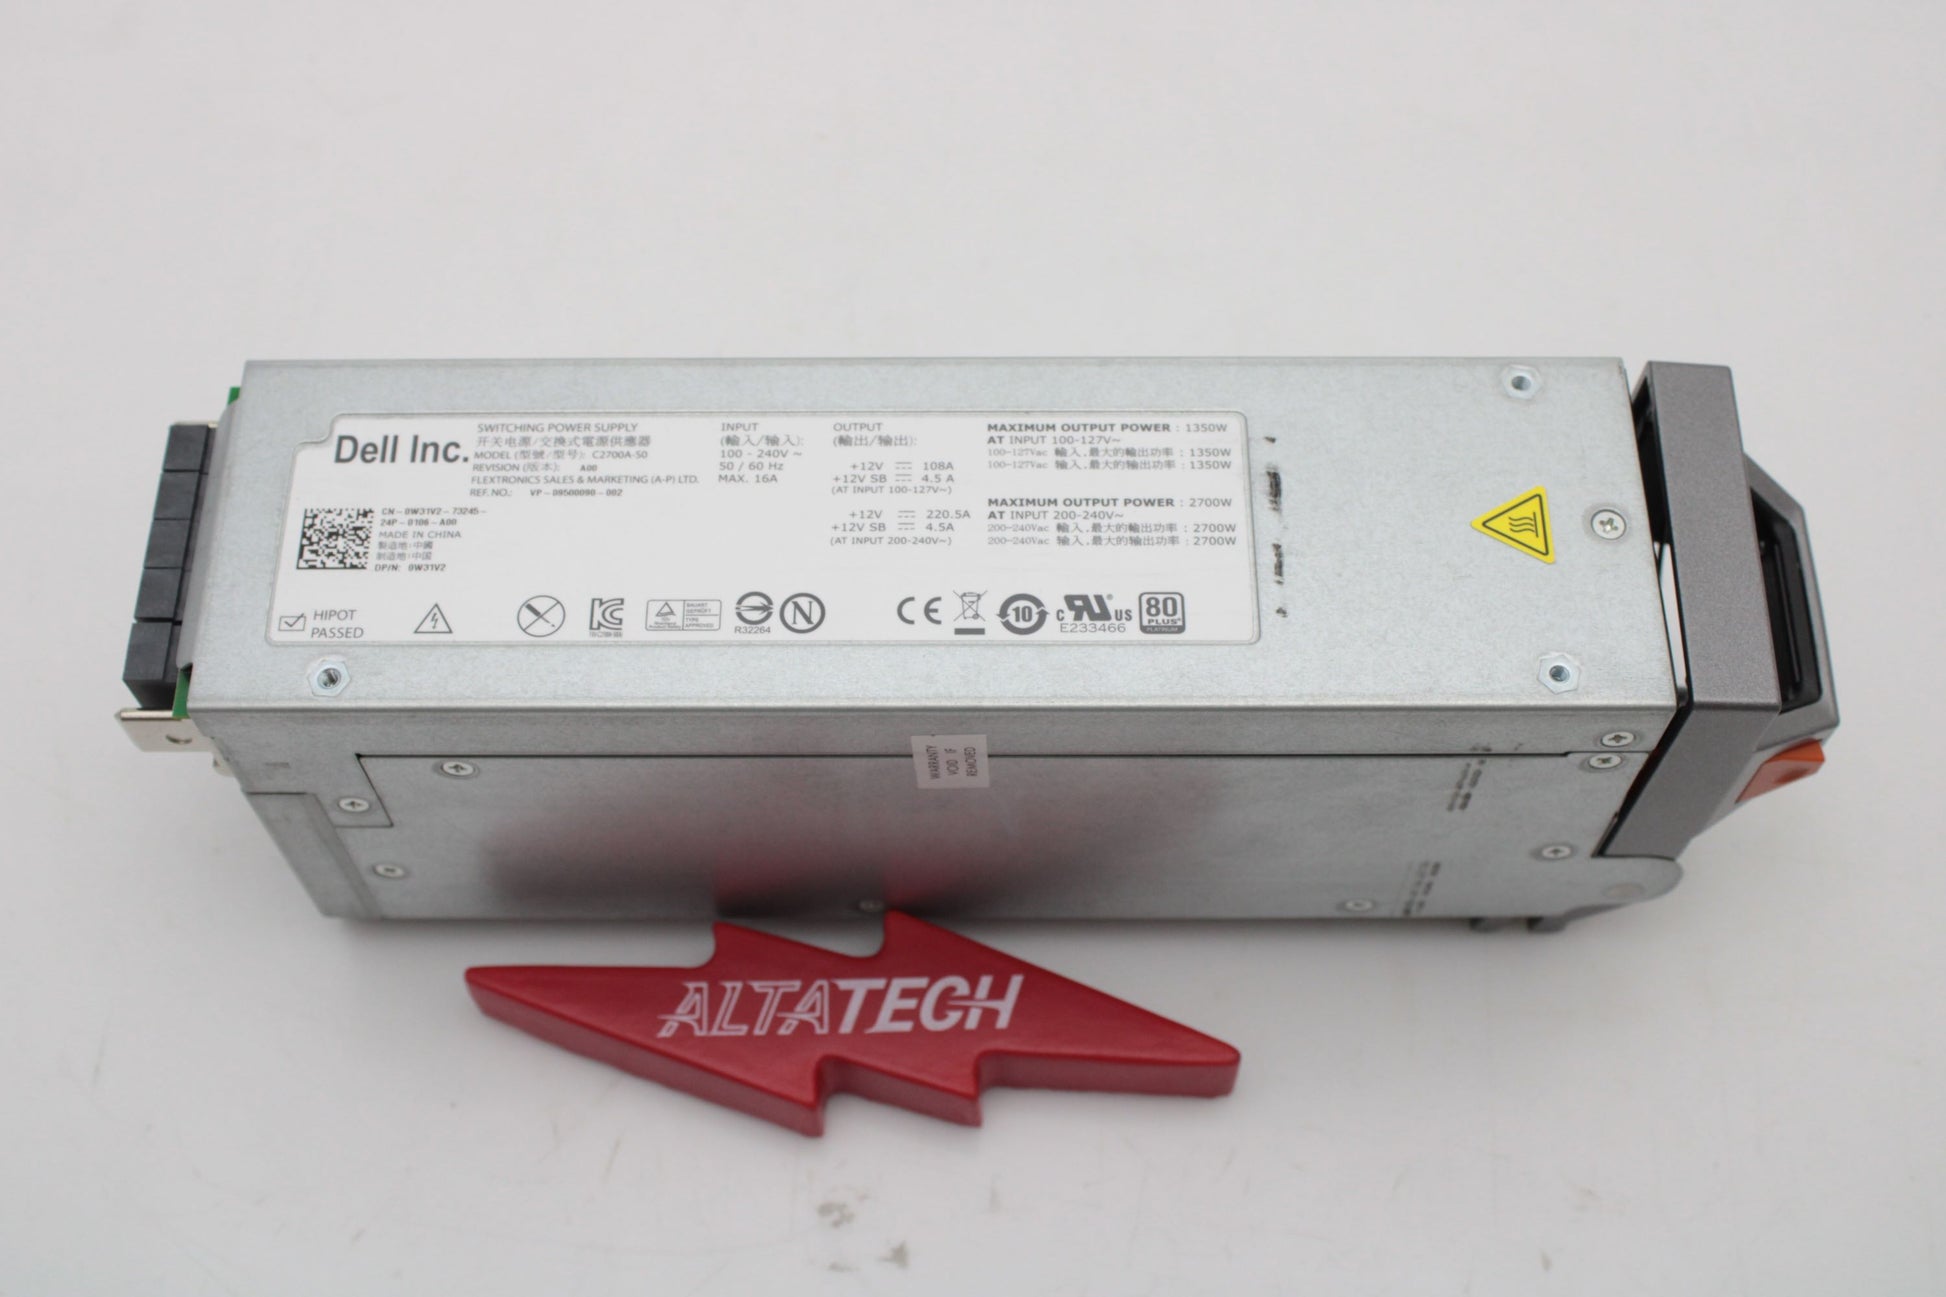 Dell 0G803N 2700W POWER SUPPLY M1000E, Used